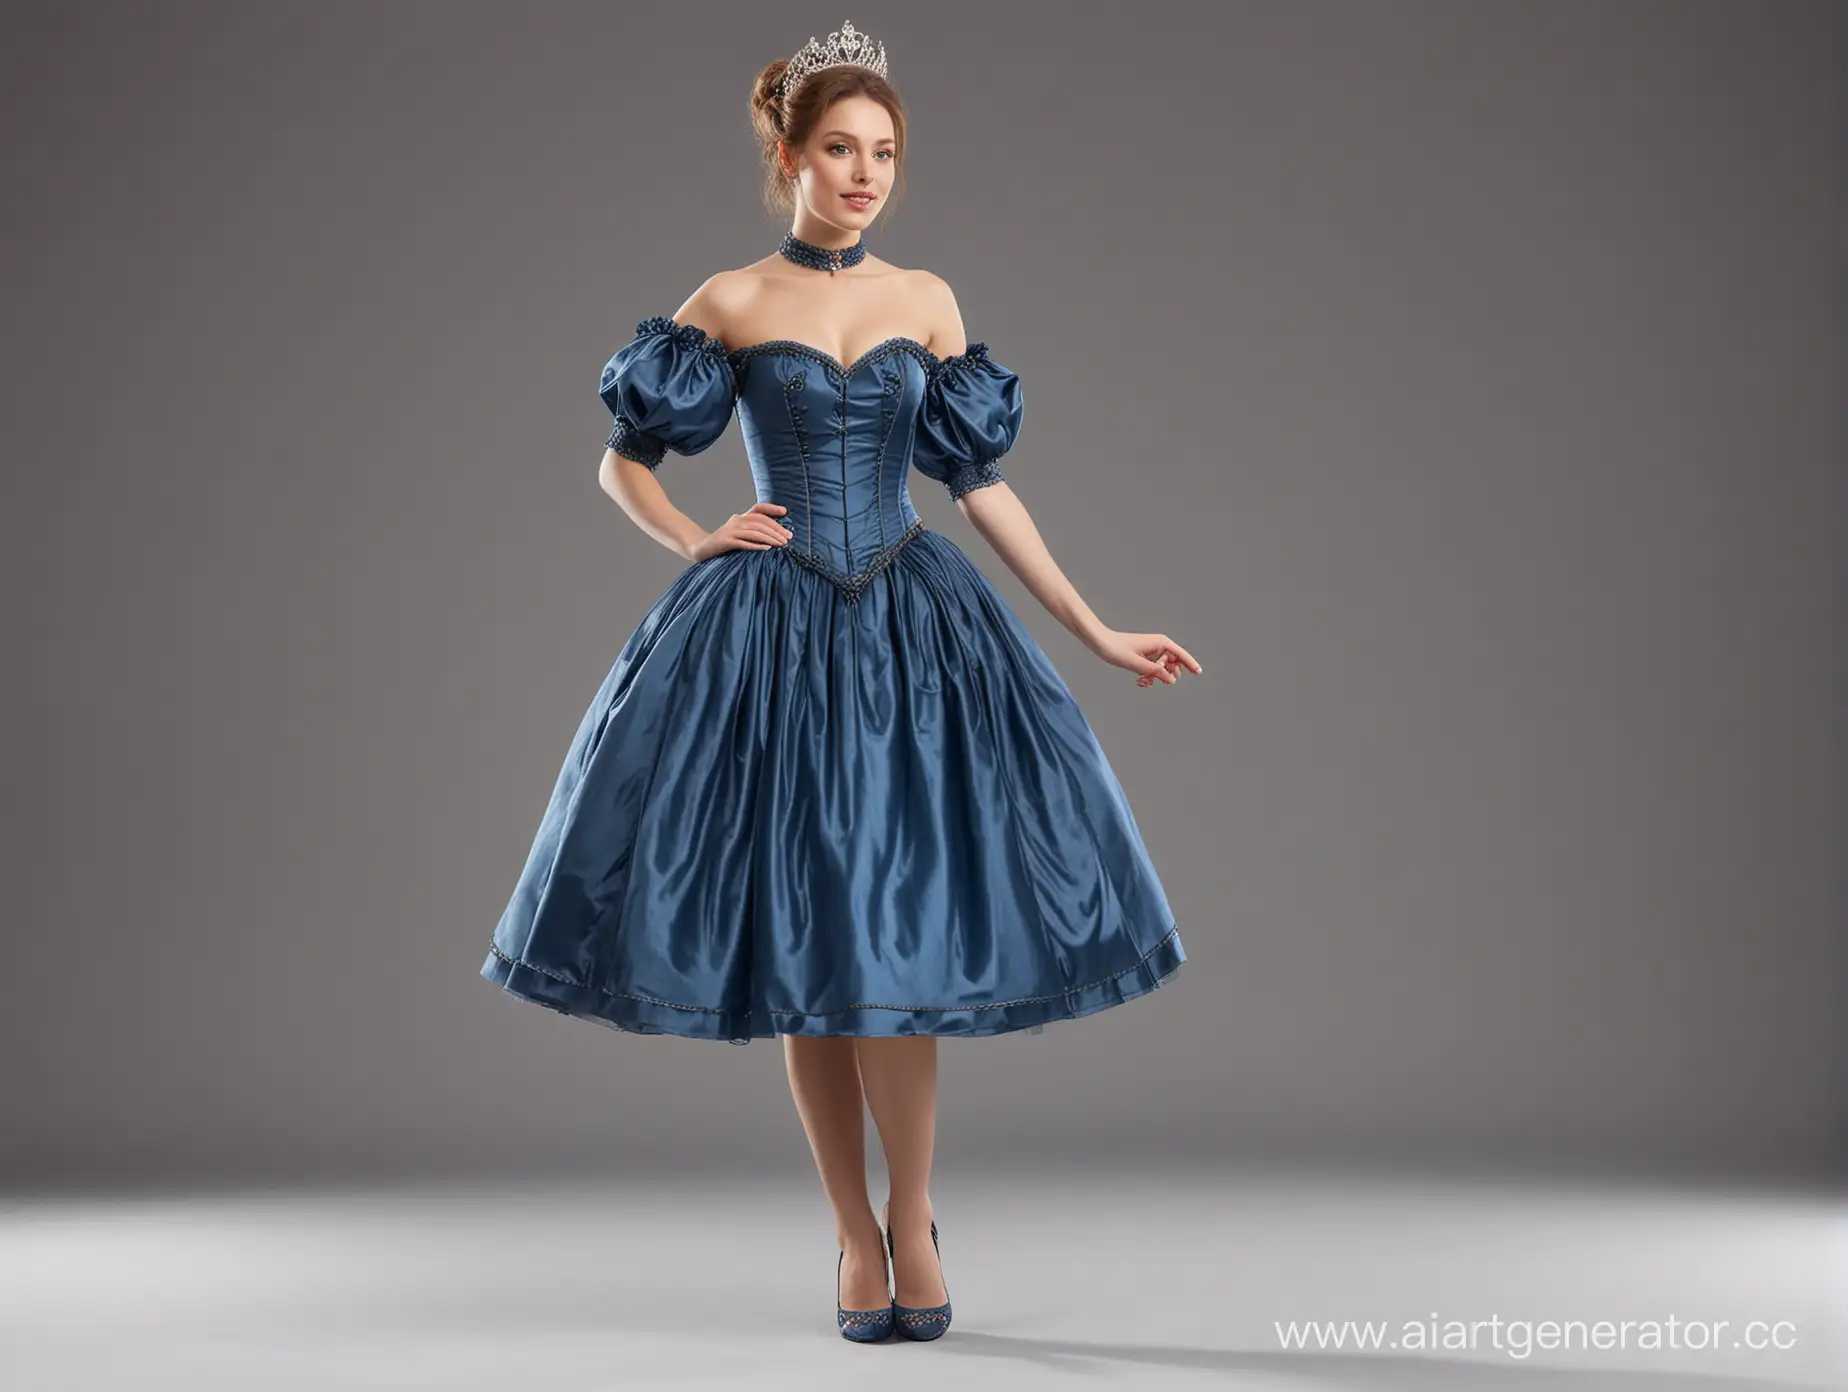 Elegant-Queen-in-Blue-Satin-Dress-with-Steel-Corset-and-Collar